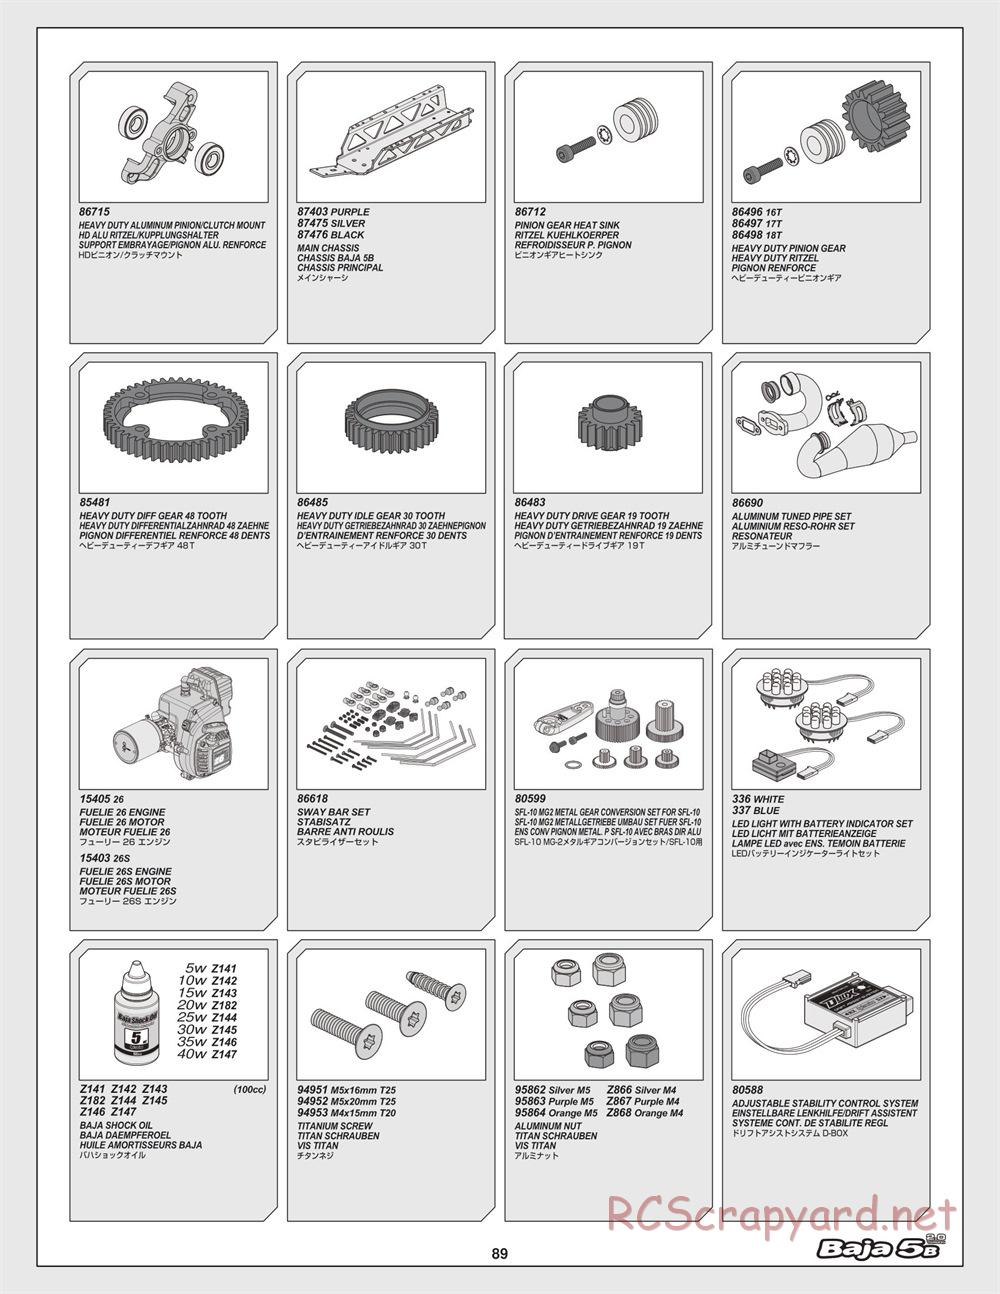 HPI - Baja 5B 2.0 - Exploded View - Page 89